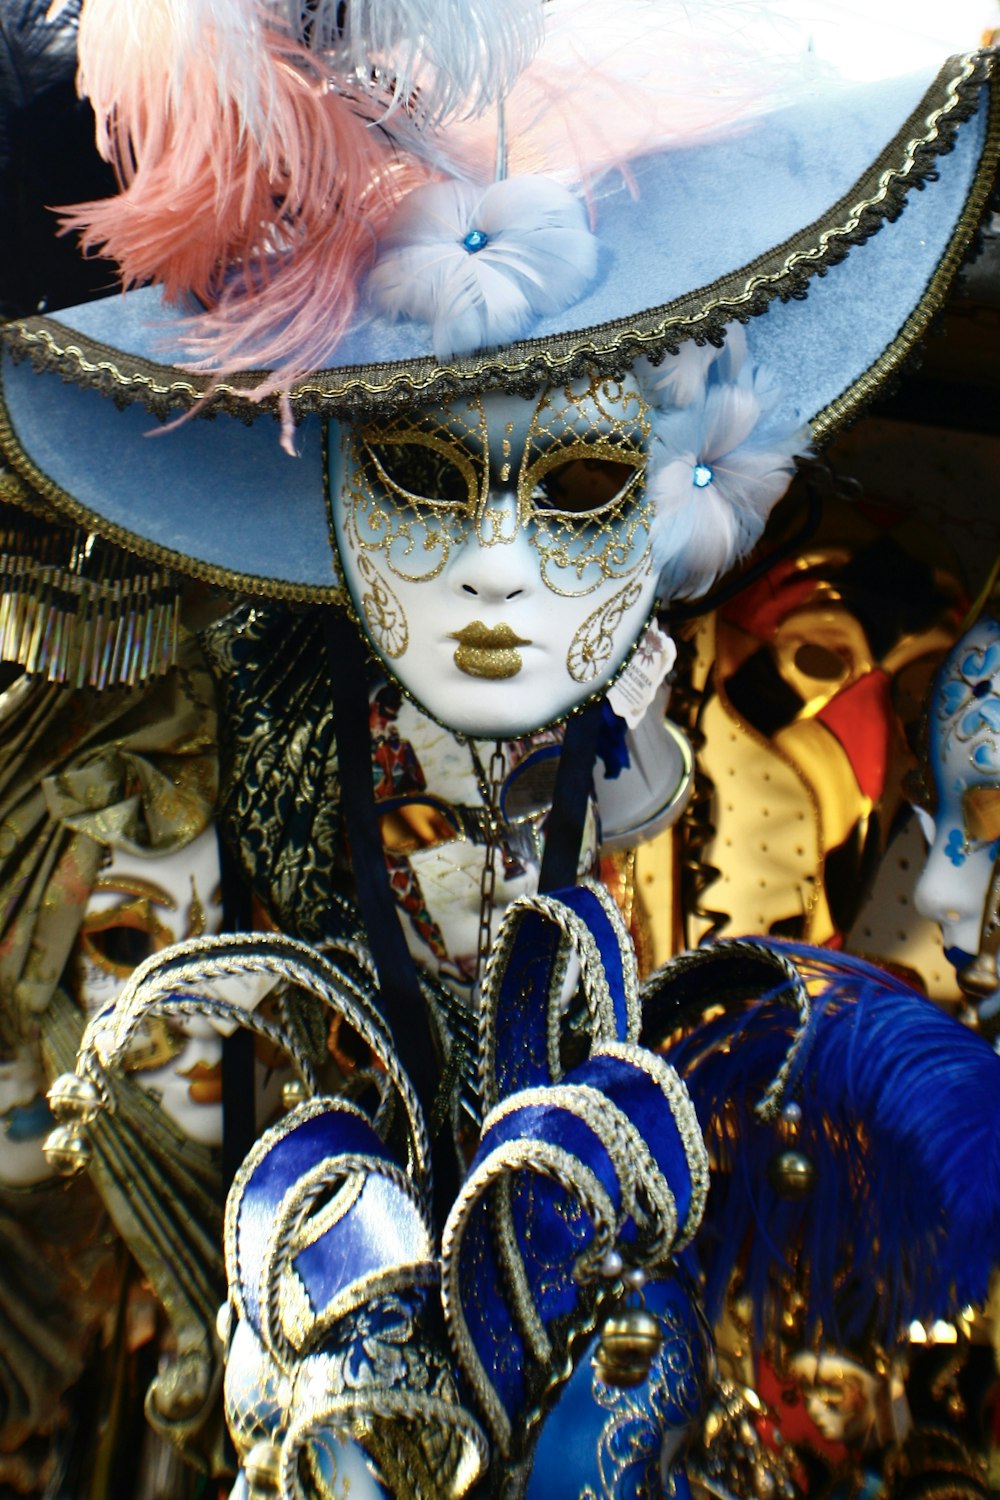 a person wearing a blue hat and a mask